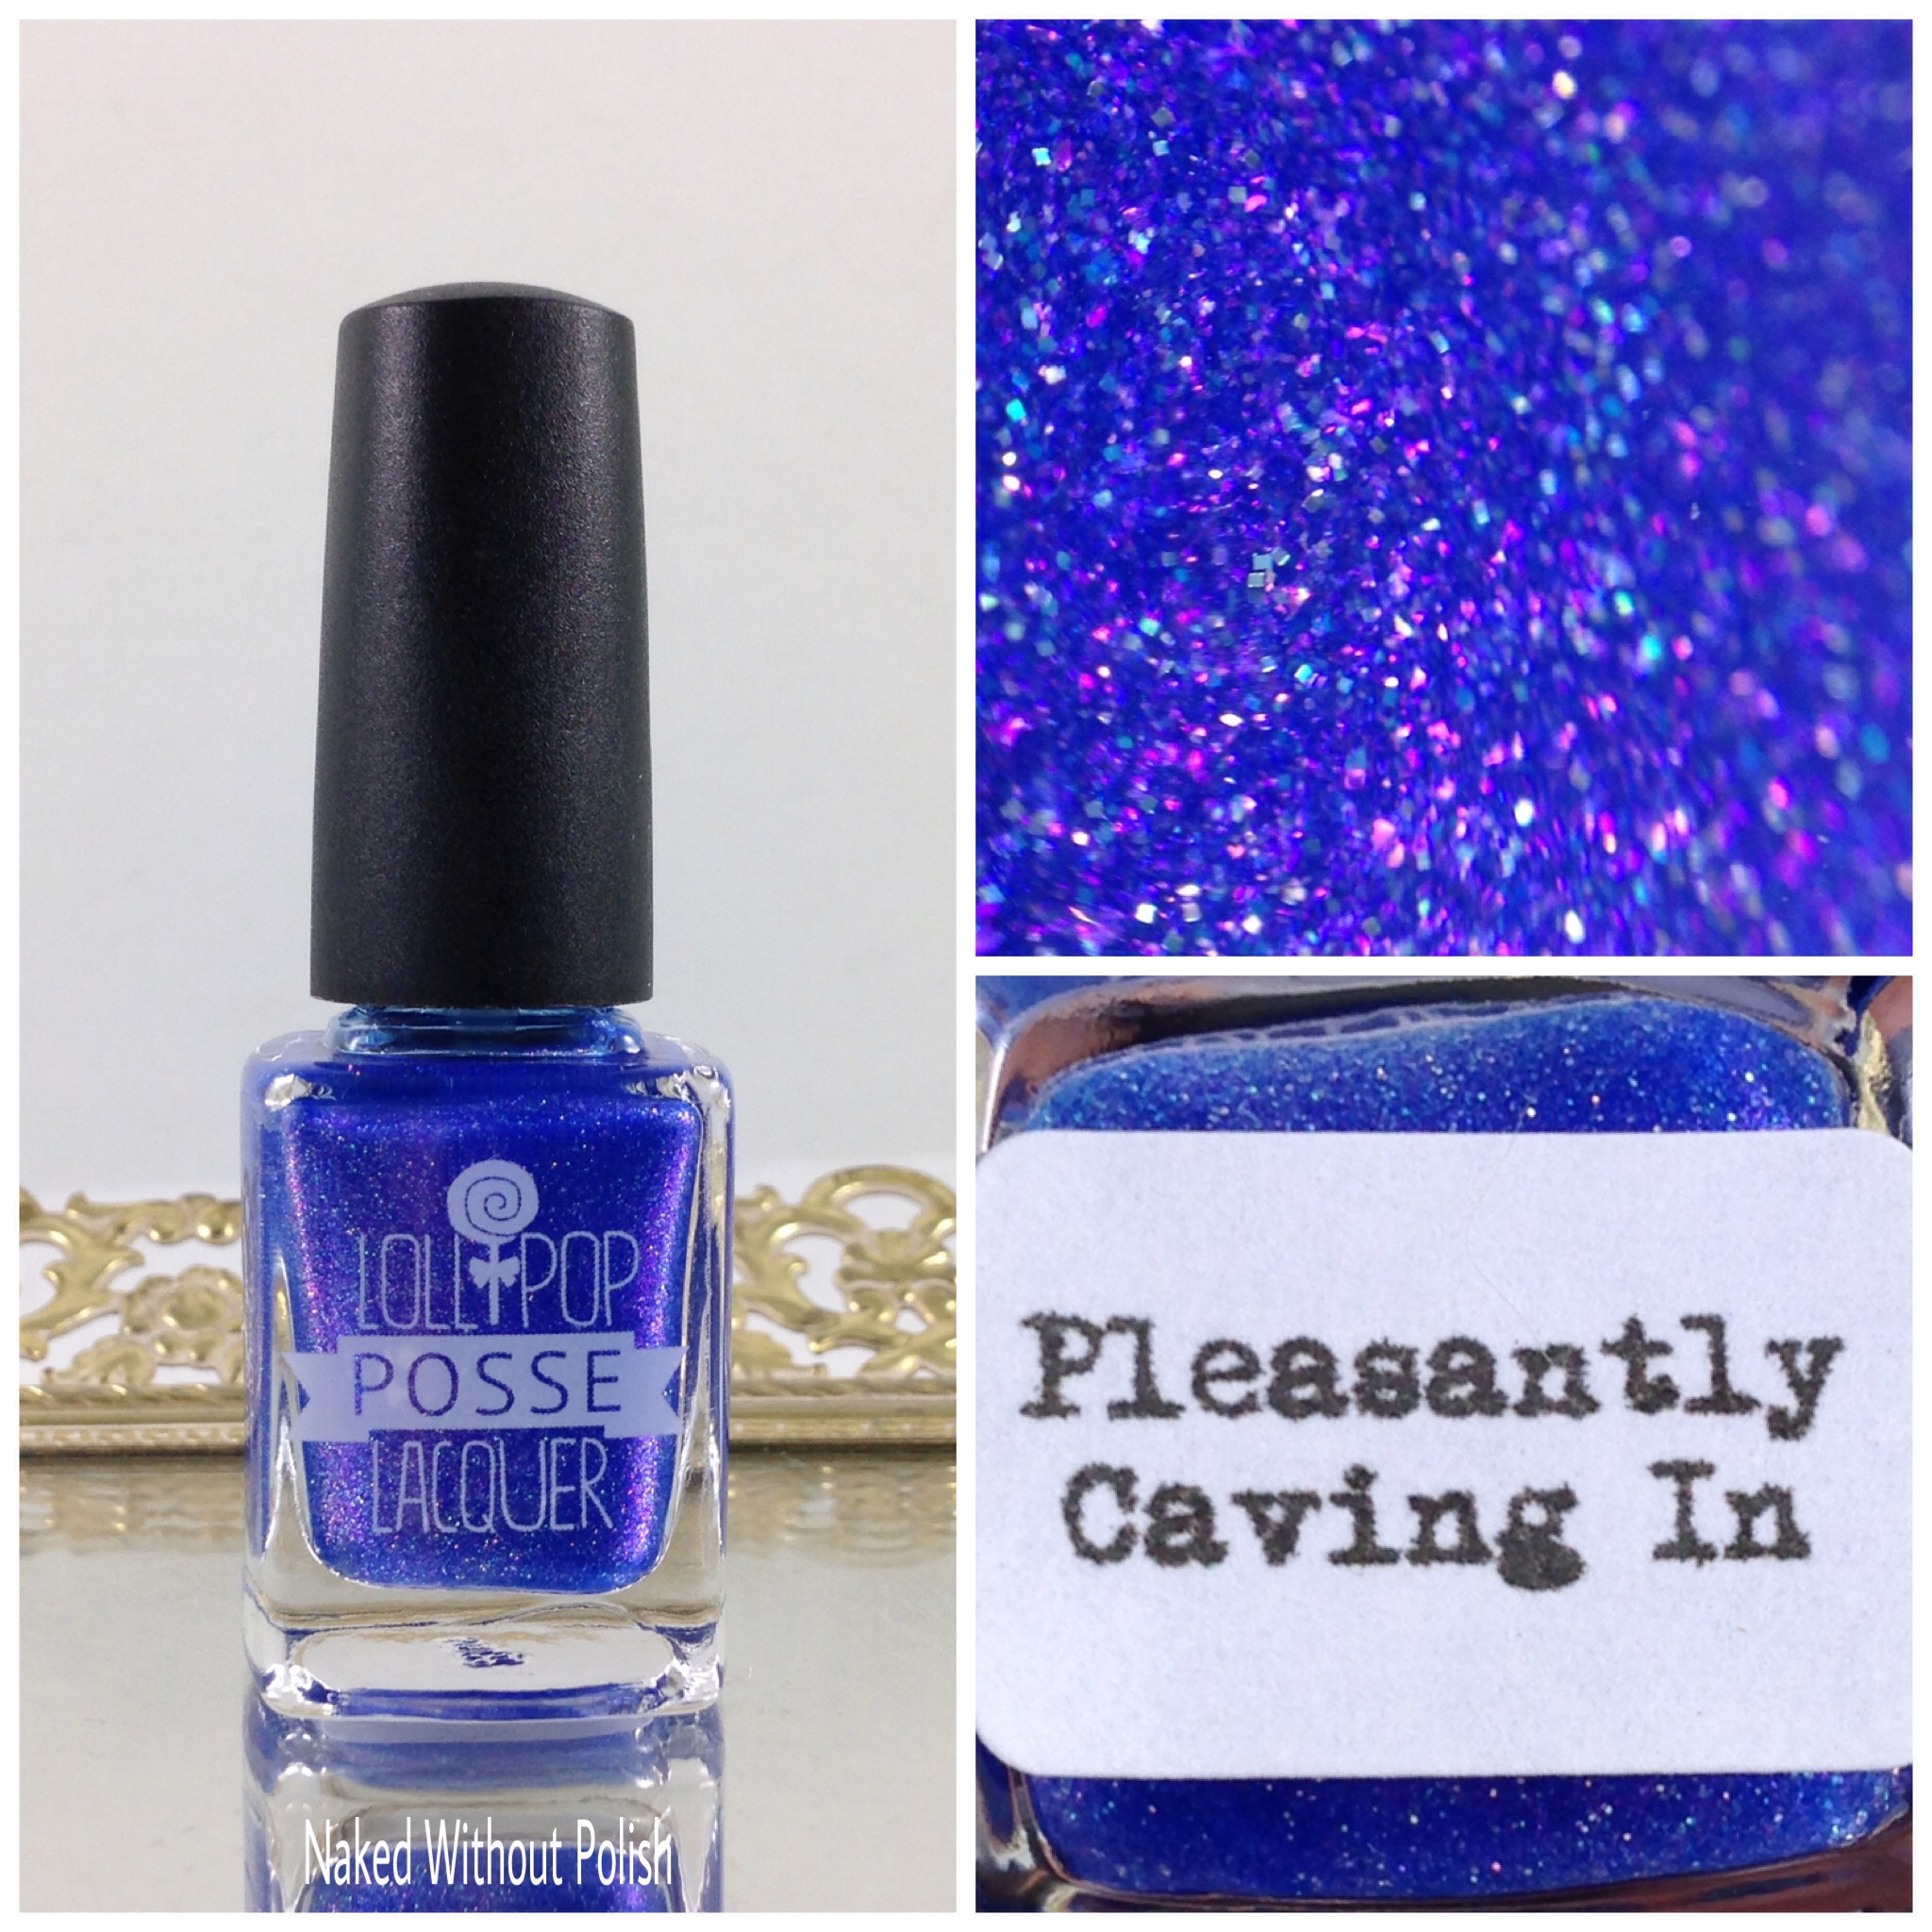 Lollipop-Posse-Lacquer-Pleasantly-Caving-In-1